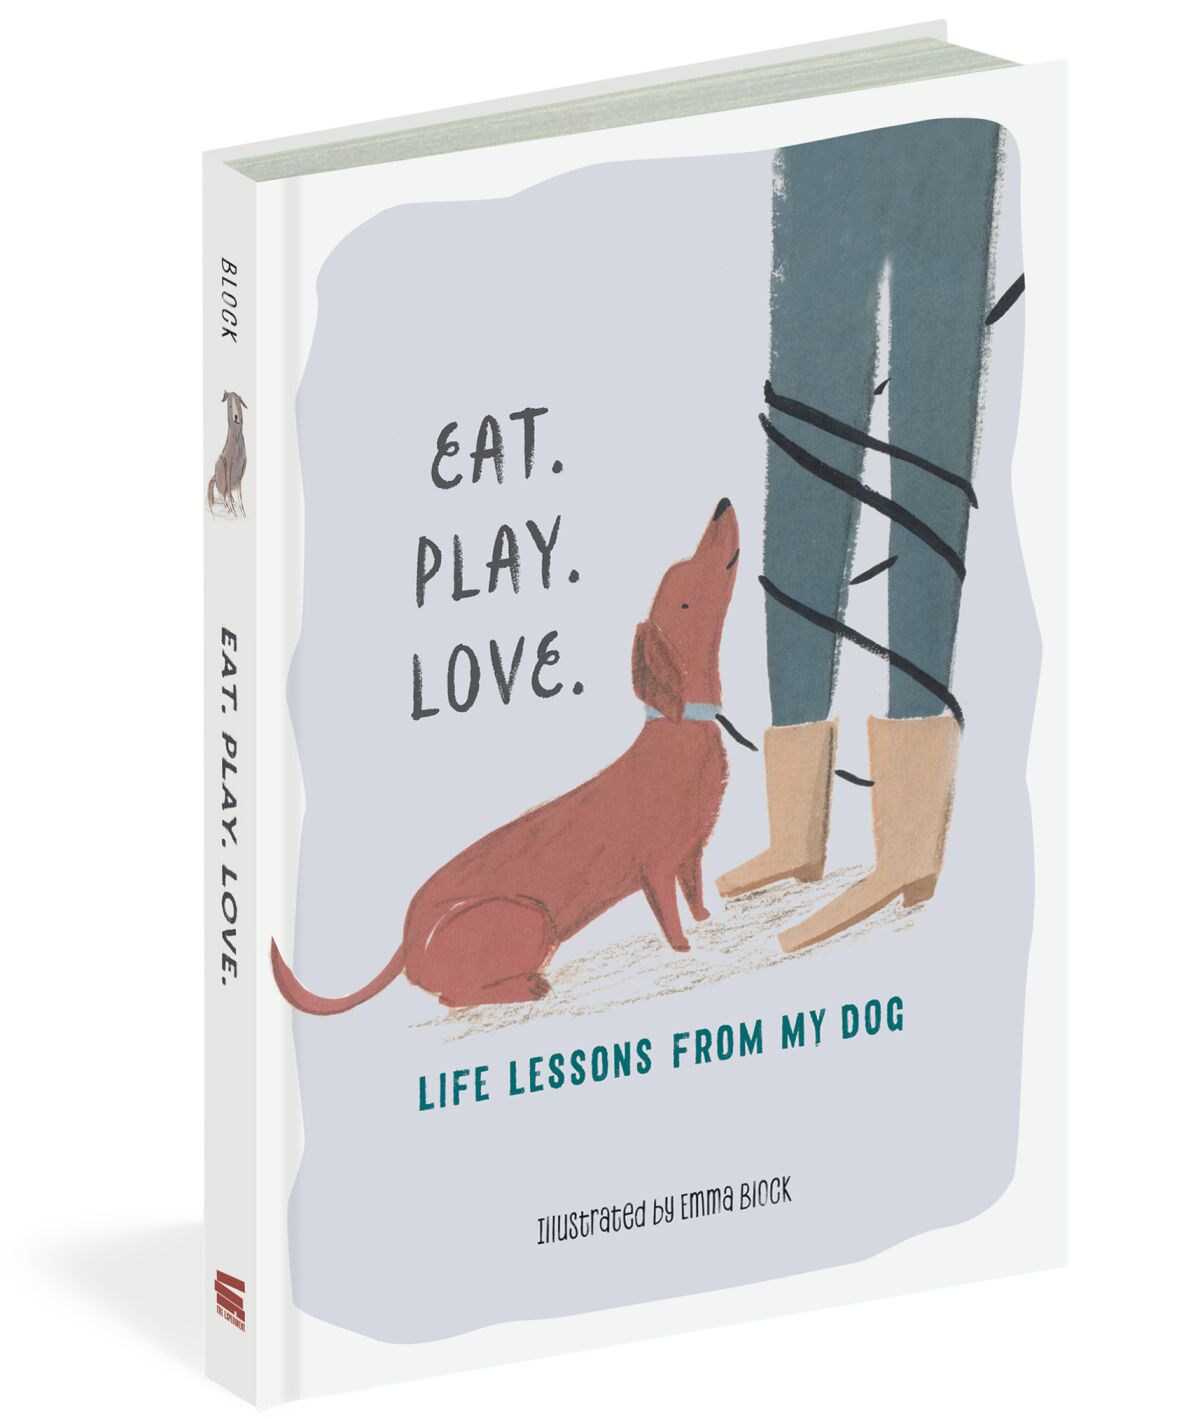 Eat. Play. Love. Life Lessons From My Dog by Emma Block Credit: The Experiment